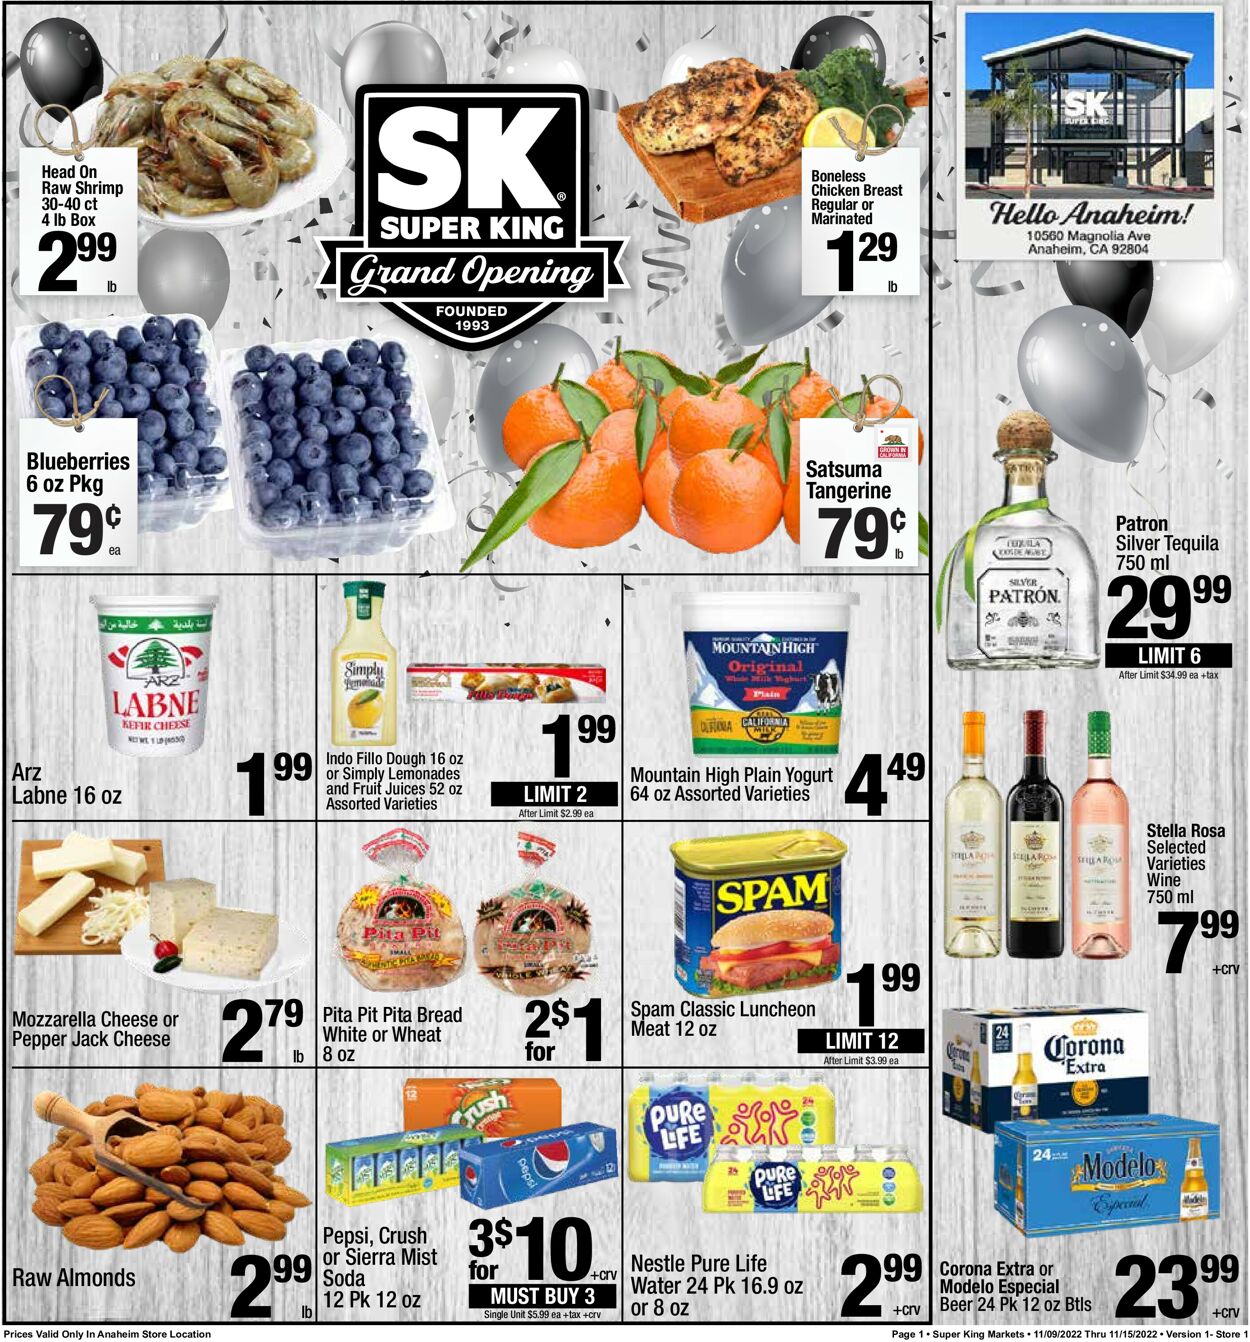 Catalogue Super King Market from 11/09/2002